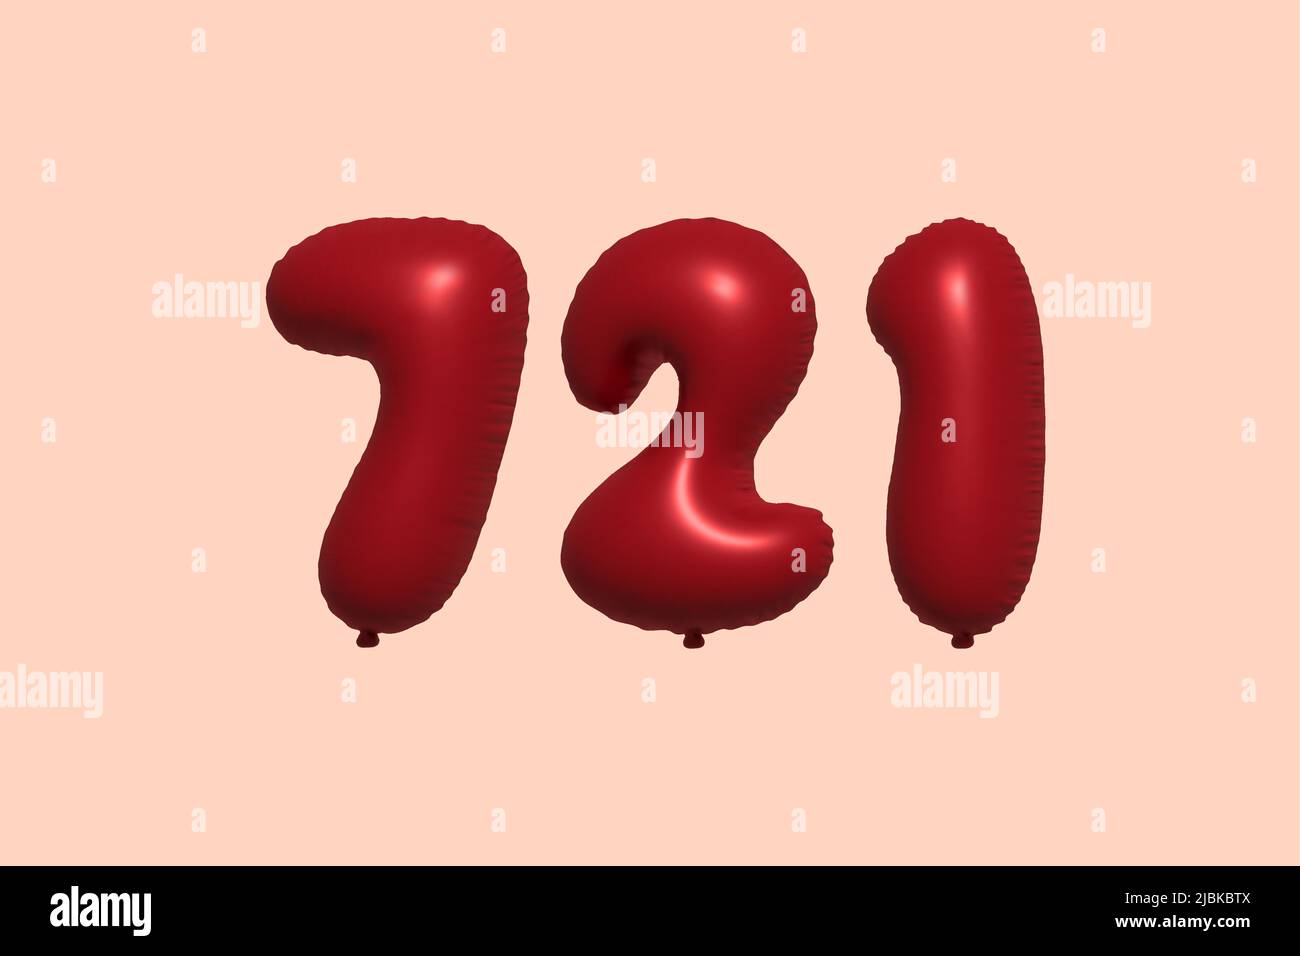 721 3d number balloon made of realistic metallic air balloon 3d rendering. 3D Red helium balloons for sale decoration Party Birthday, Celebrate anniversary, Wedding Holiday. Vector illustration Stock Vector